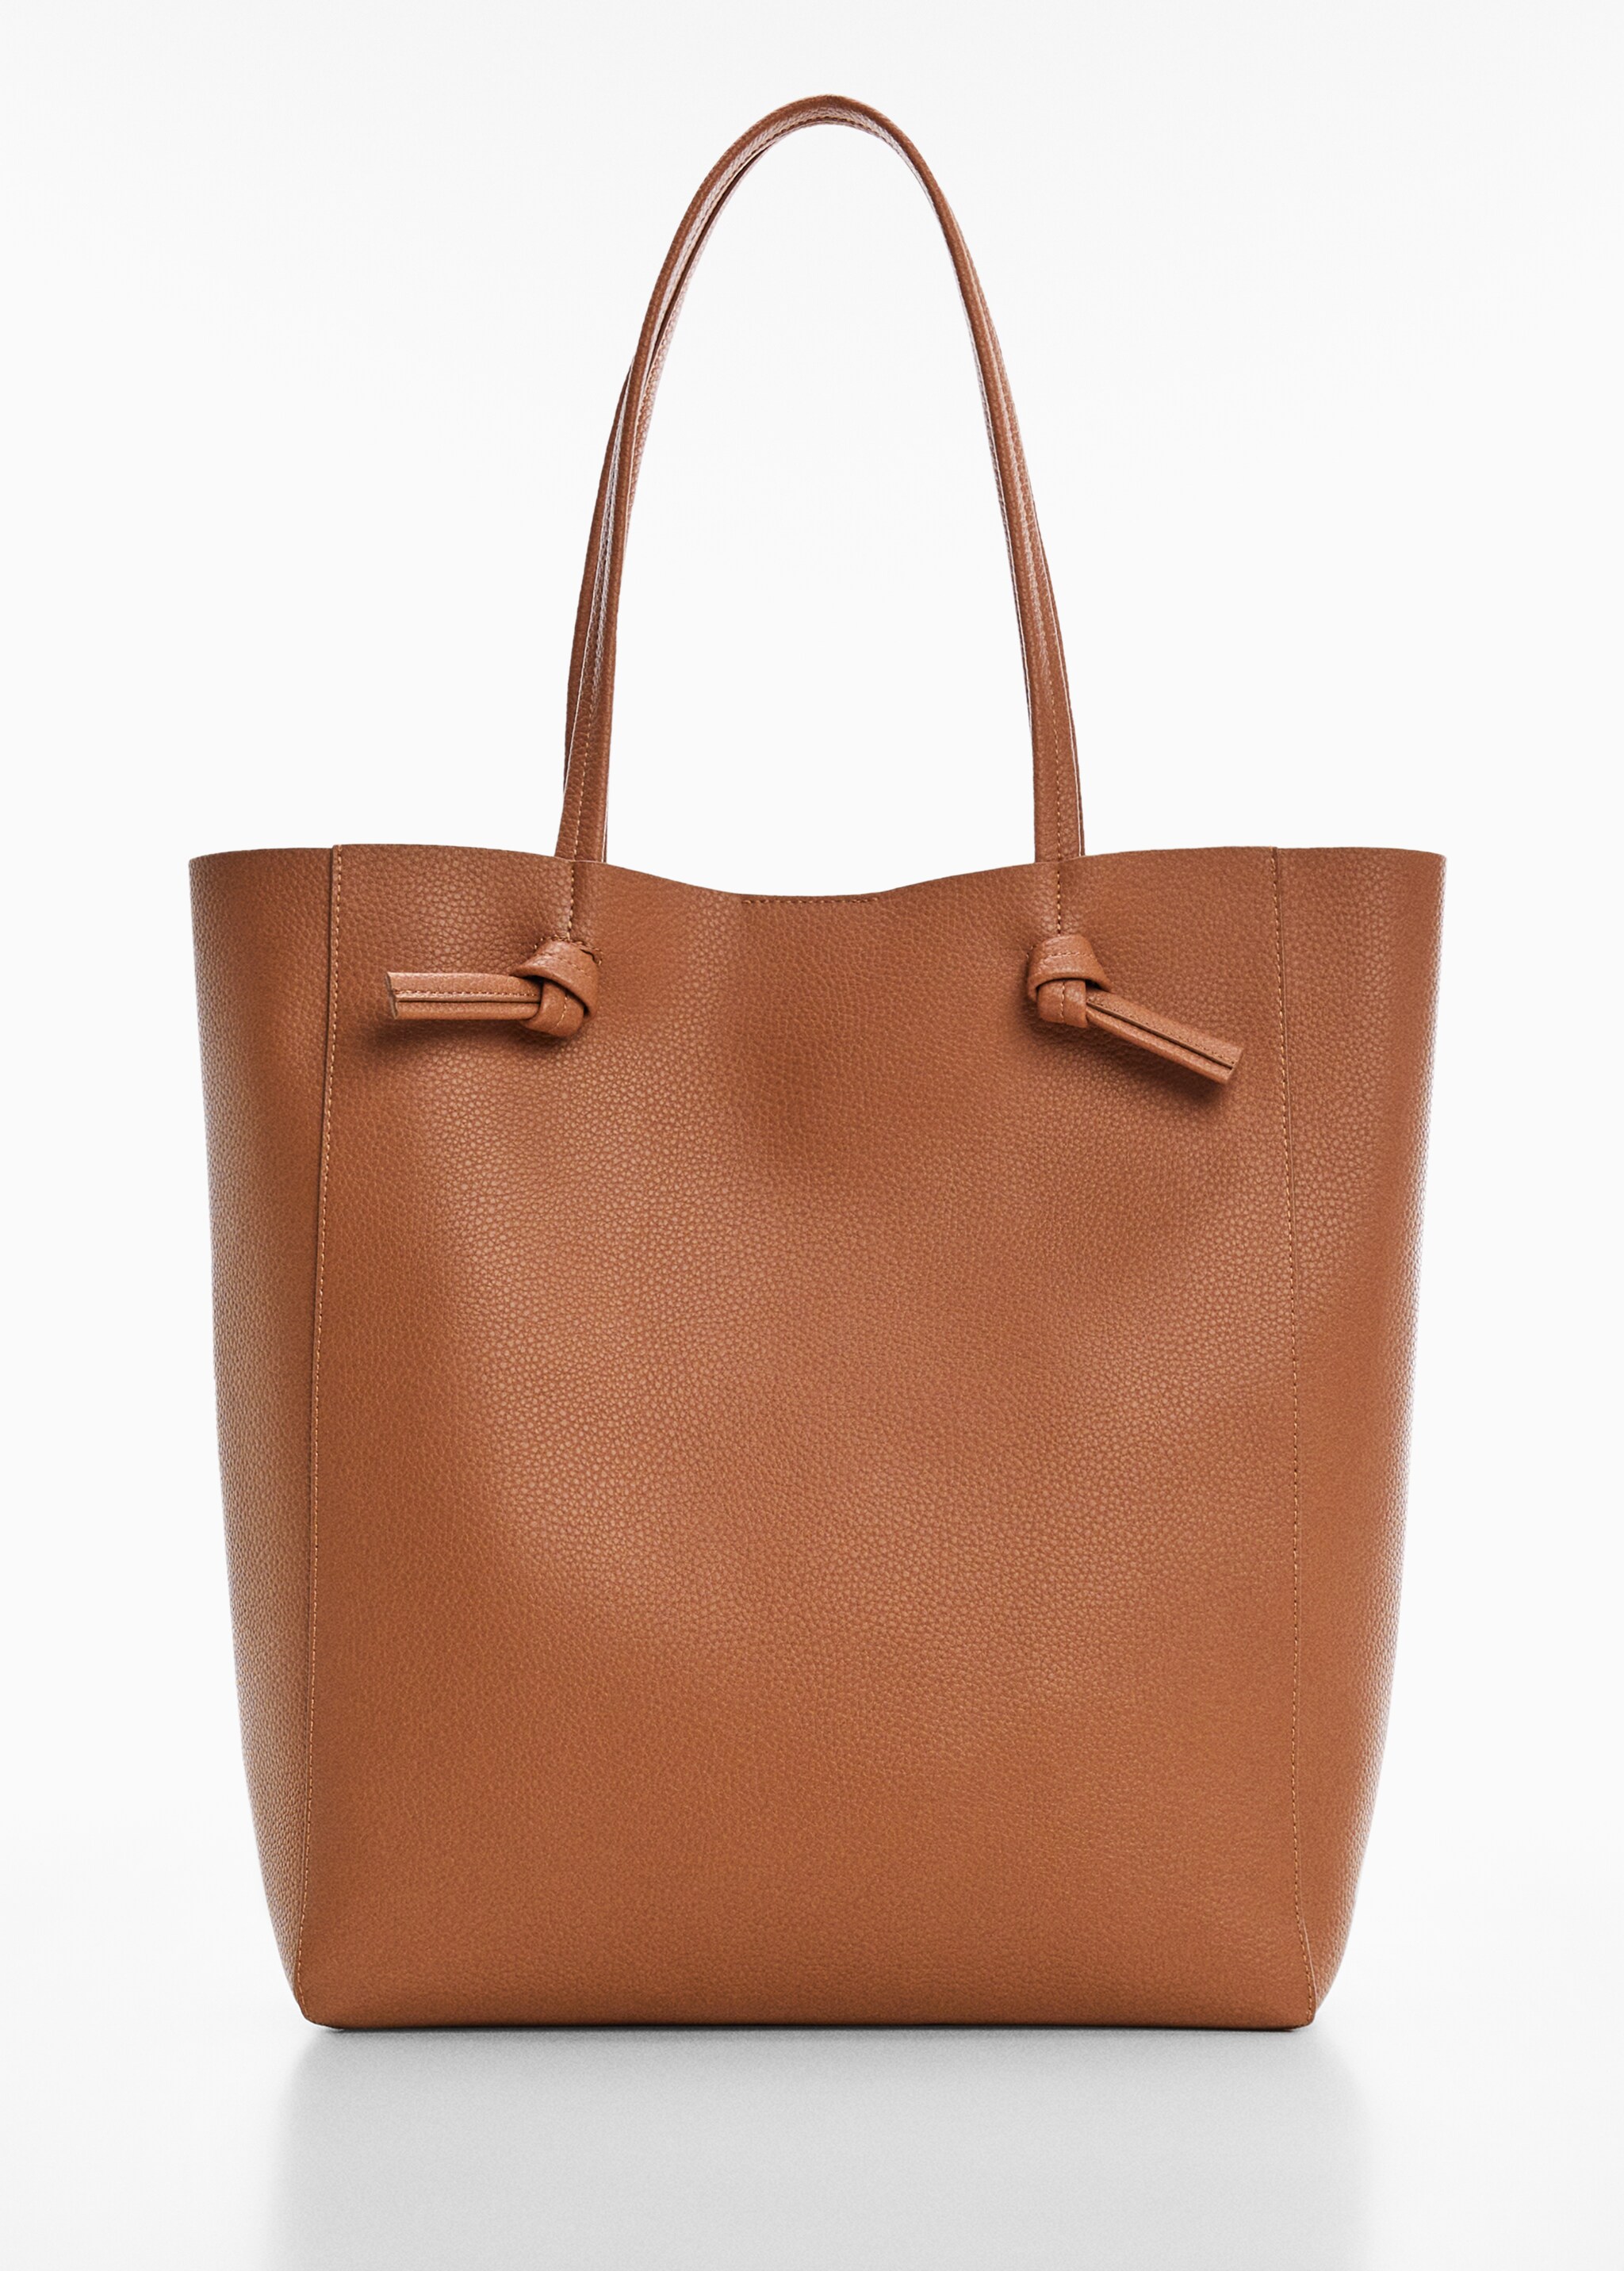 Knot handle shopper bag - Article without model